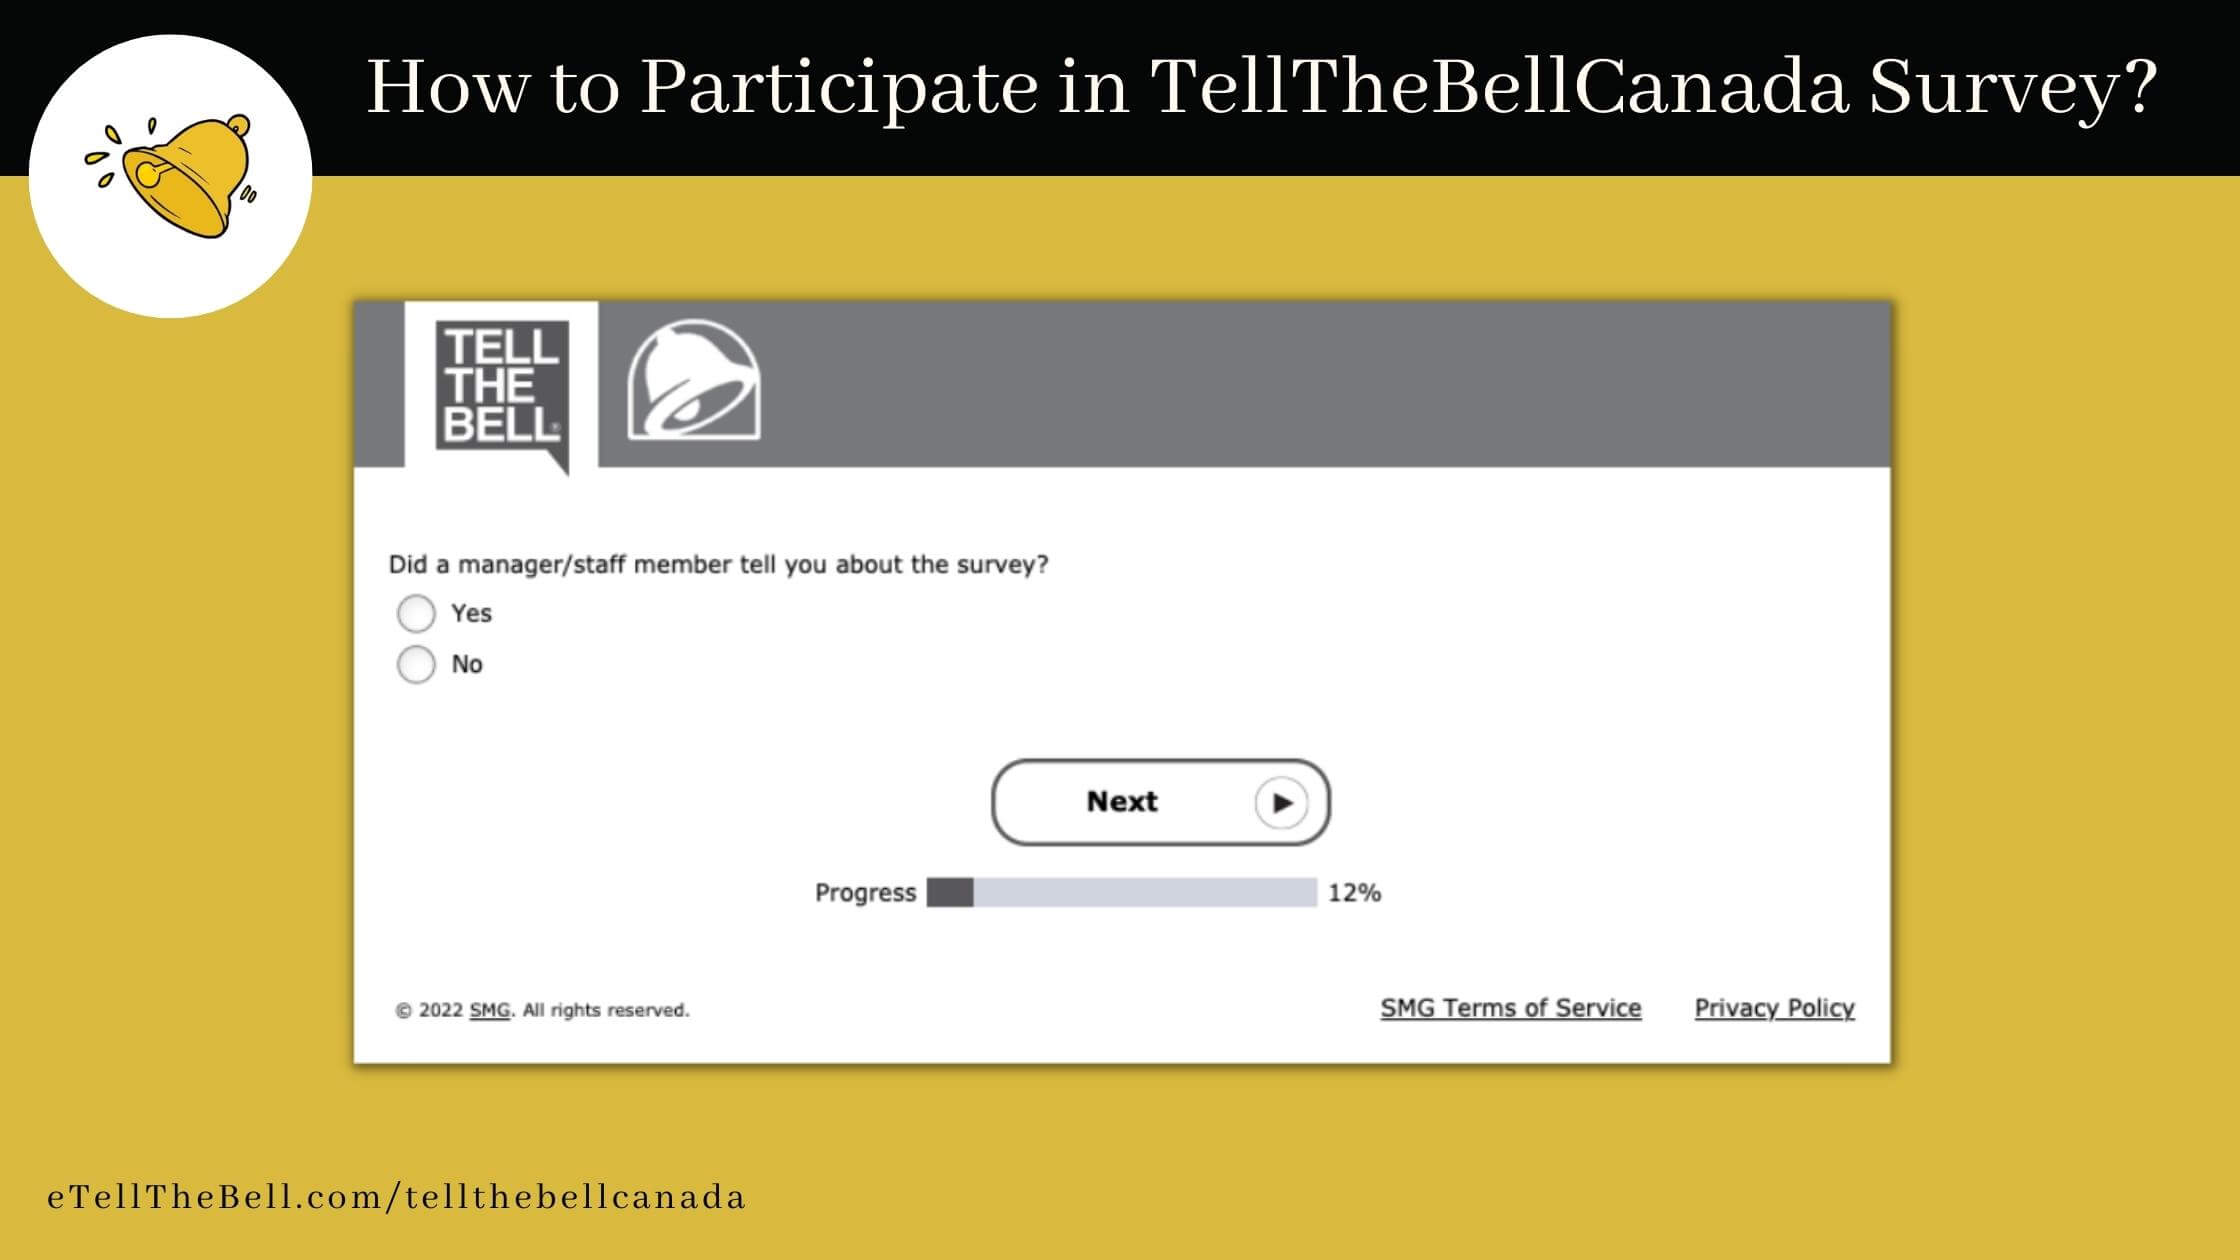 Did a manager or staff member tell you about TellTheBellCanada survey